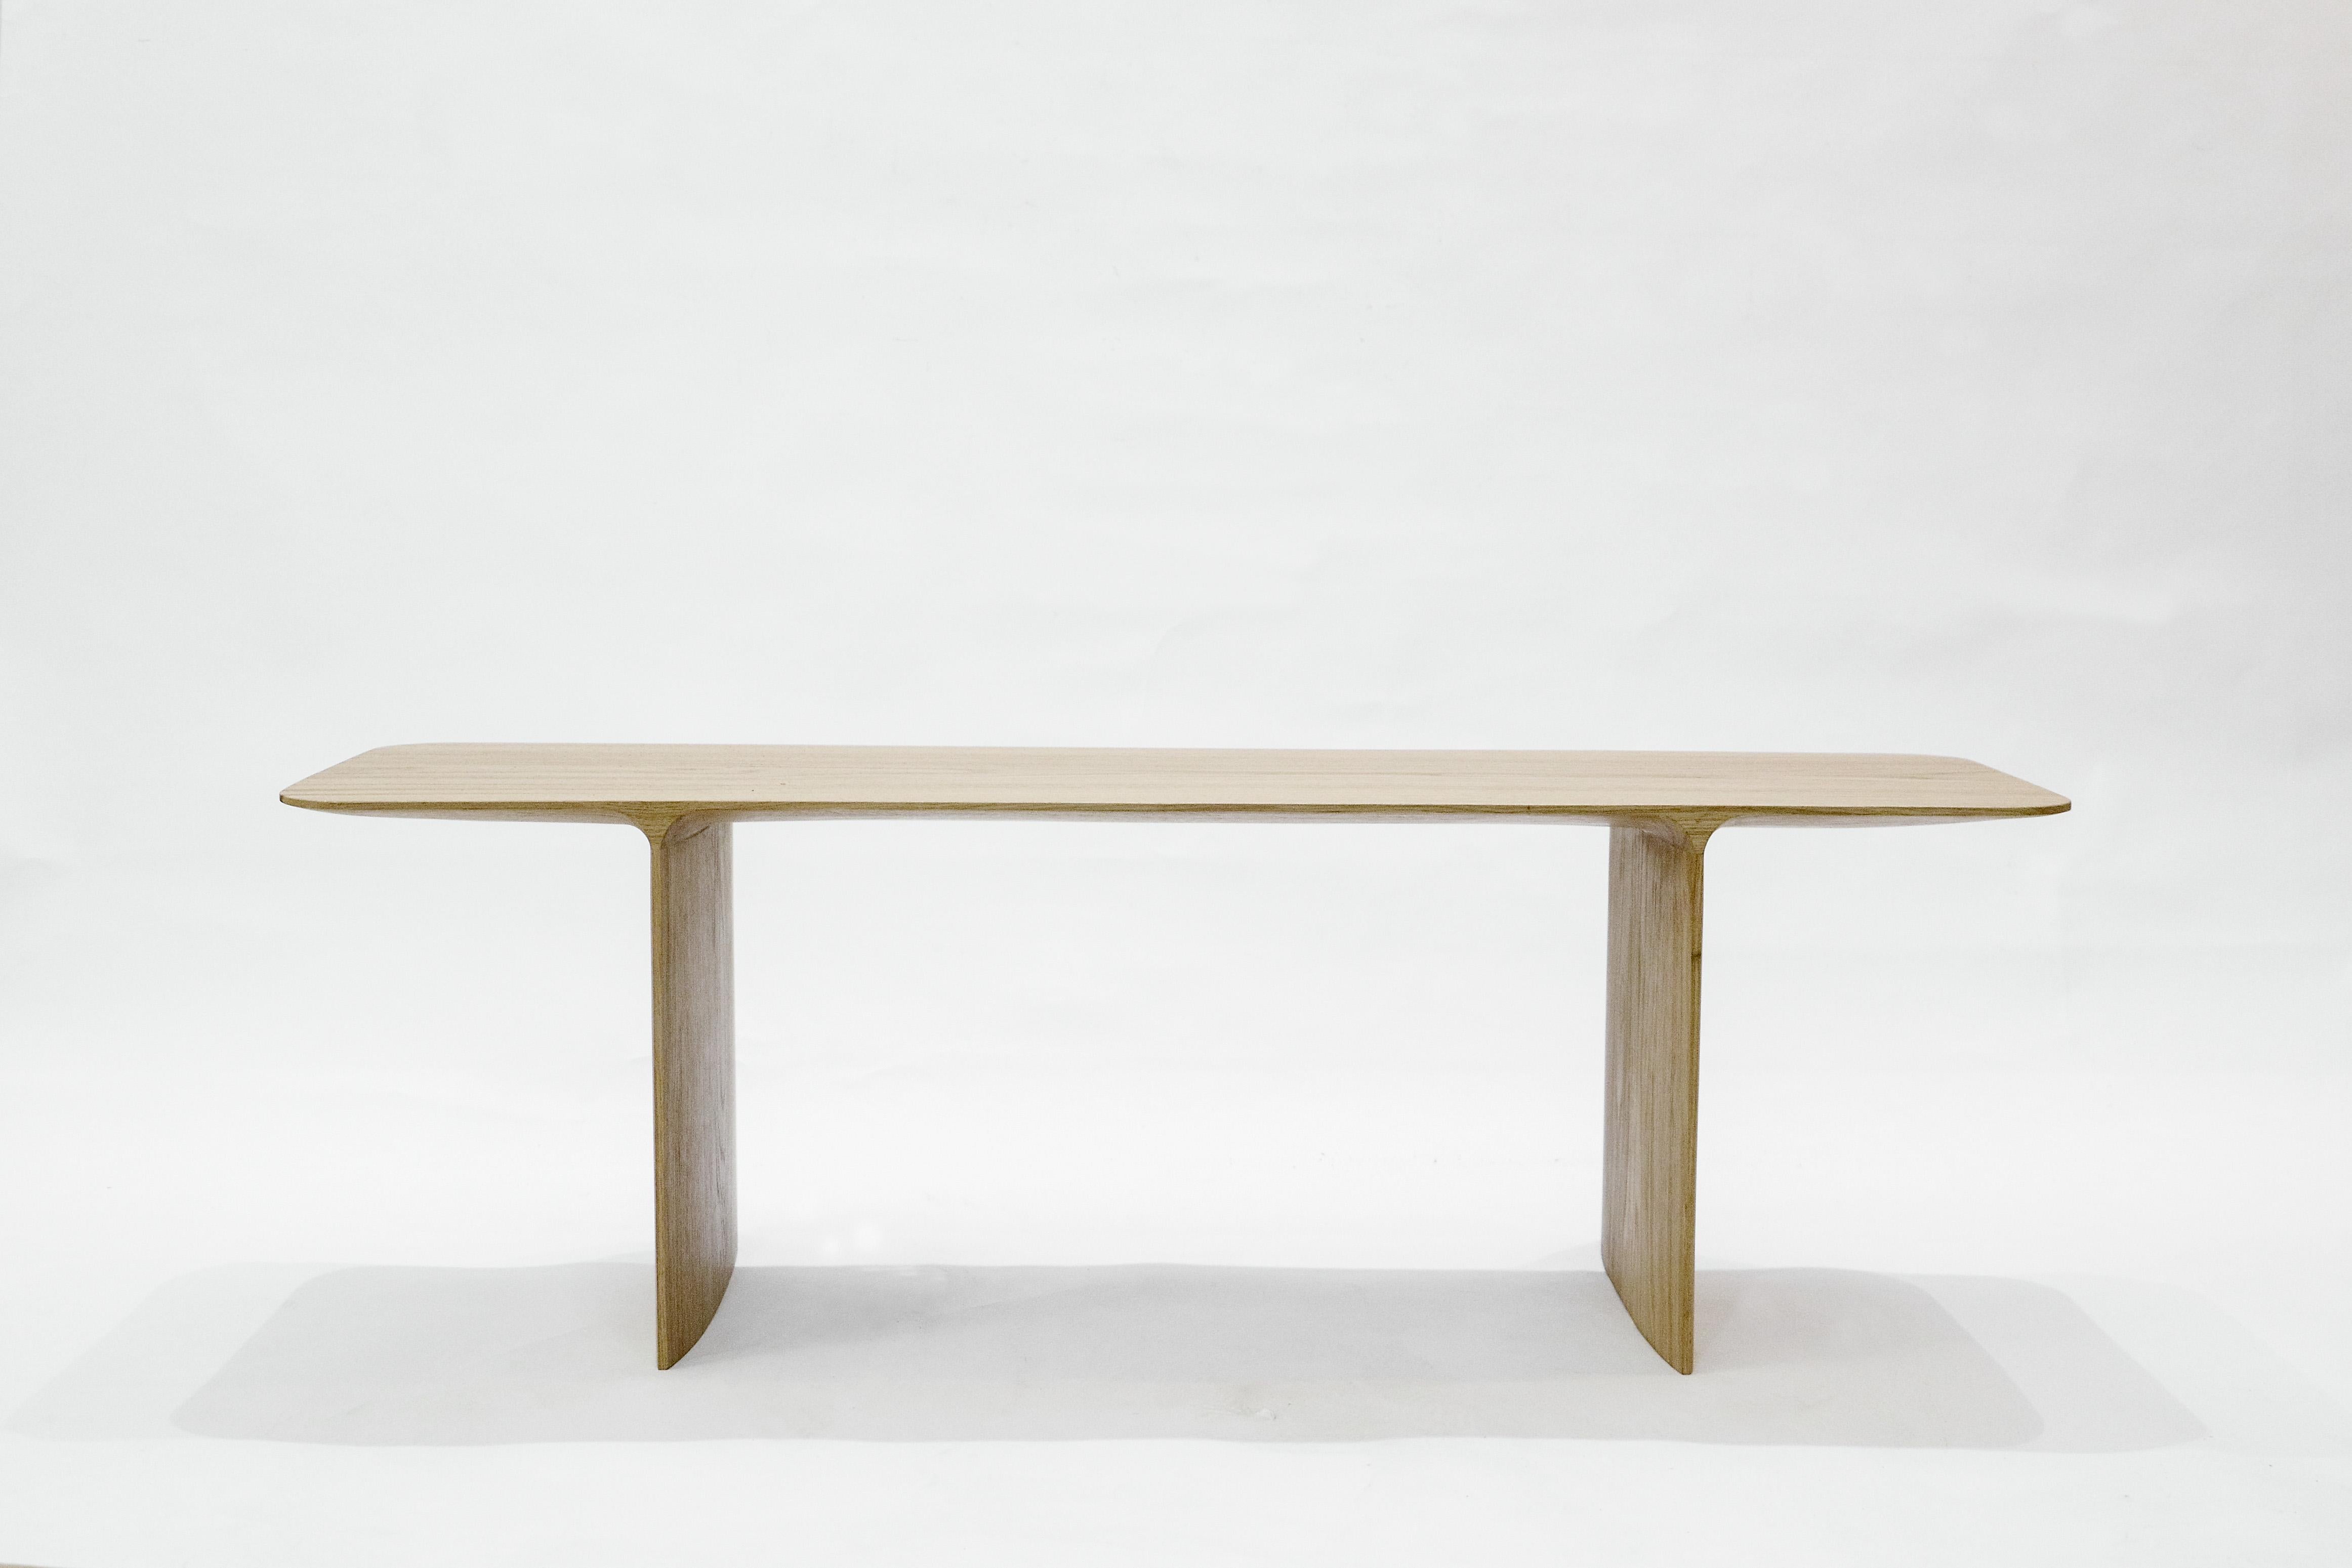 Shave oak bench by Cedric Breisacher
Dimension: L 160 x W 40 x H 45 cm
Materials: Oak.
Finish: Wax-oiled.
Available in Oxyde Black finish.
Can be made to order in other lengths.

Minimalist lines for an iconic bench. Hand carved with manual tools,